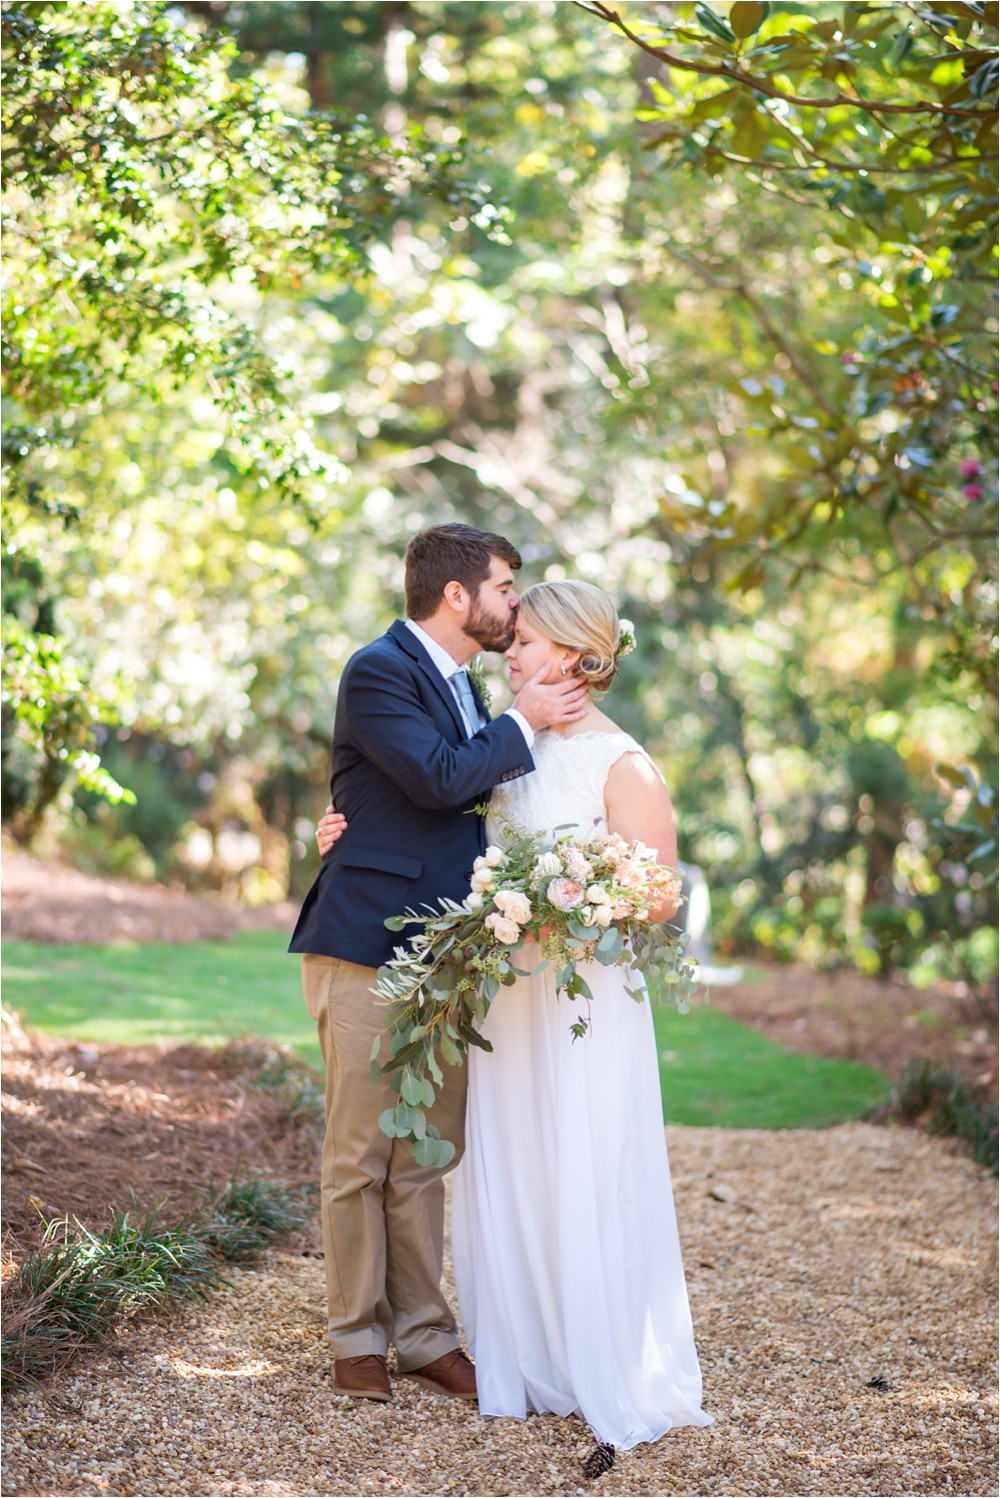 intimate-outdoor-wedding-at-home-in-columbus-georgia-by-eliza-morrill-photography_0022